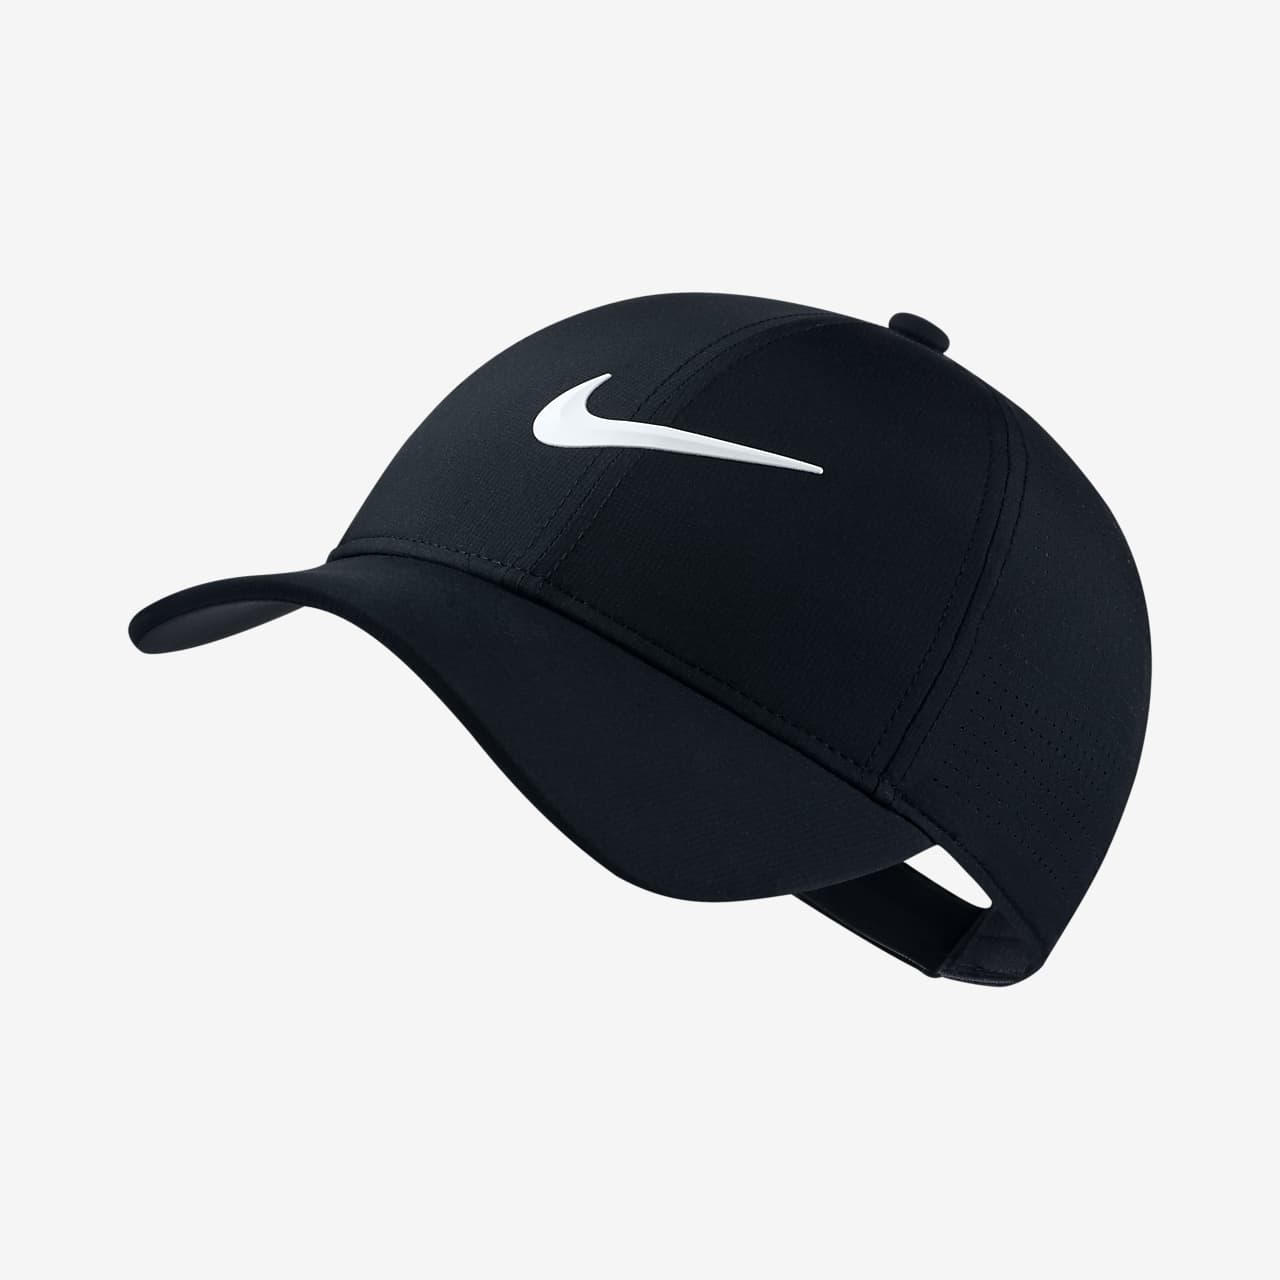 nike men's 2018 aerobill legacy91 perforated golf hat